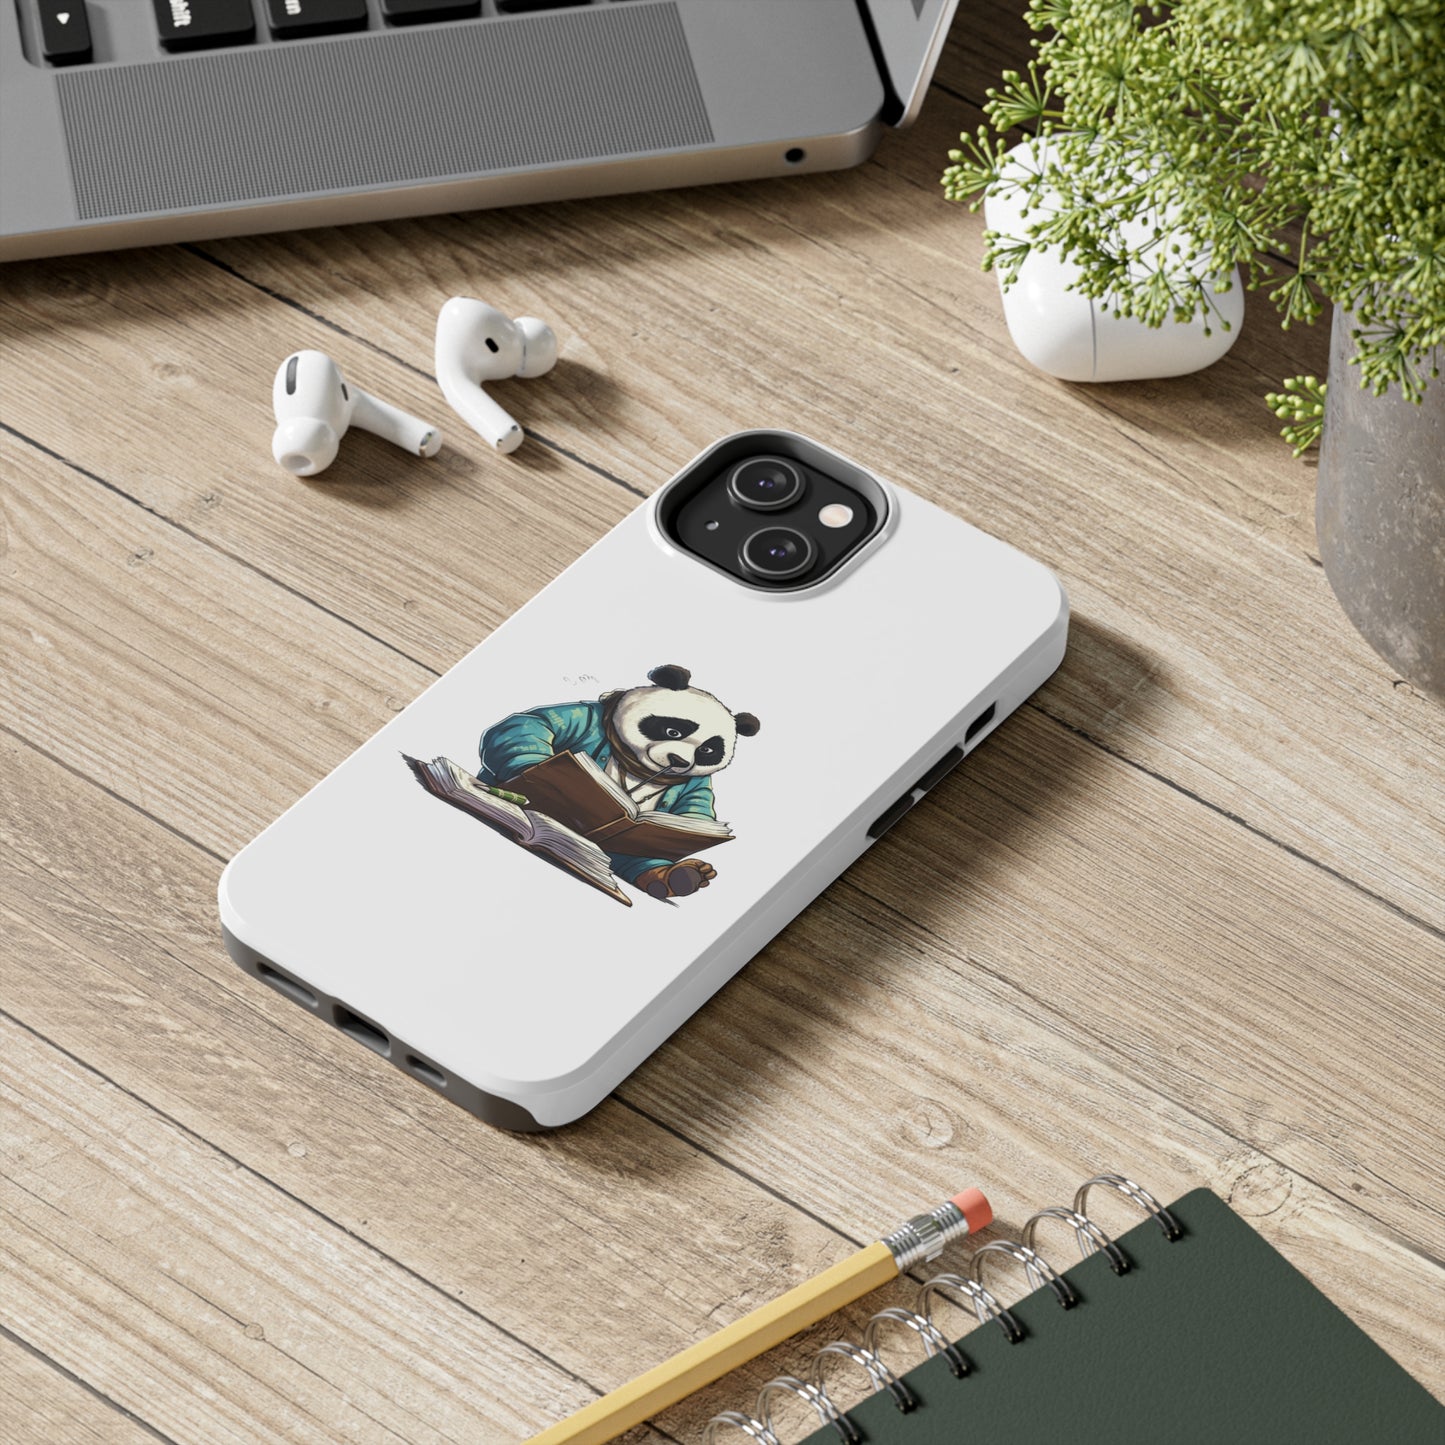 Phone Cases with a Studious Panda Engrossed in a Humorous Pun Book!